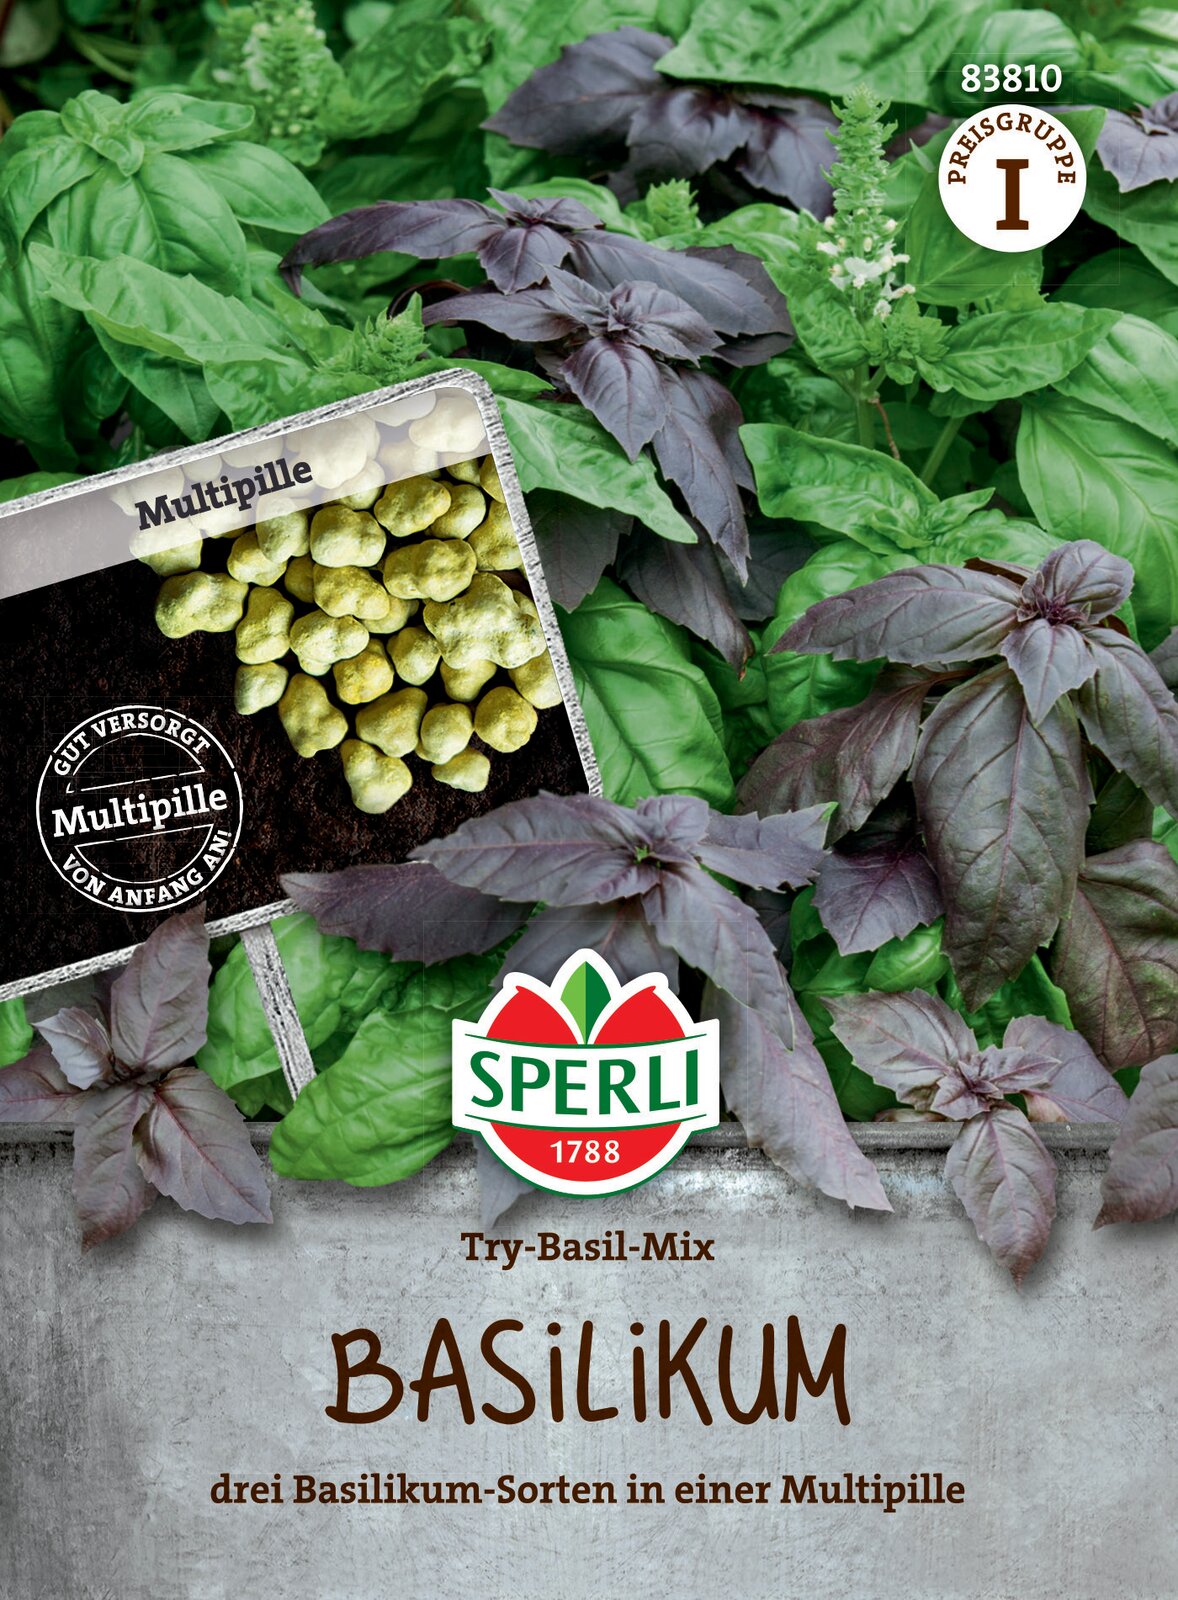 Basil trio drained seed Try-Basil-Mix 20 seeds Sperli